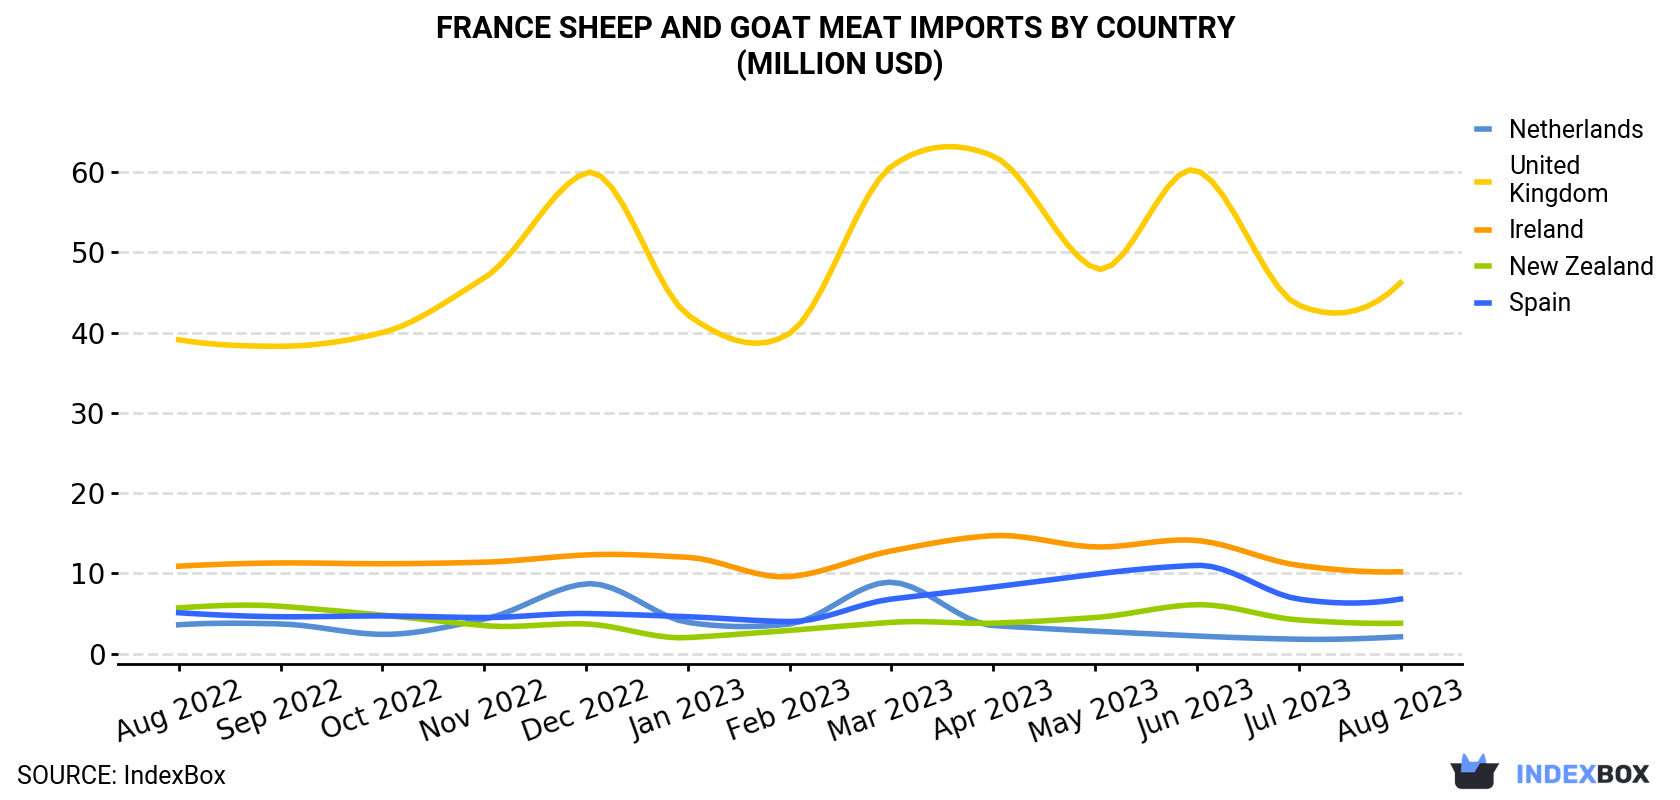 France Sheep And Goat Meat Imports By Country (Million USD)